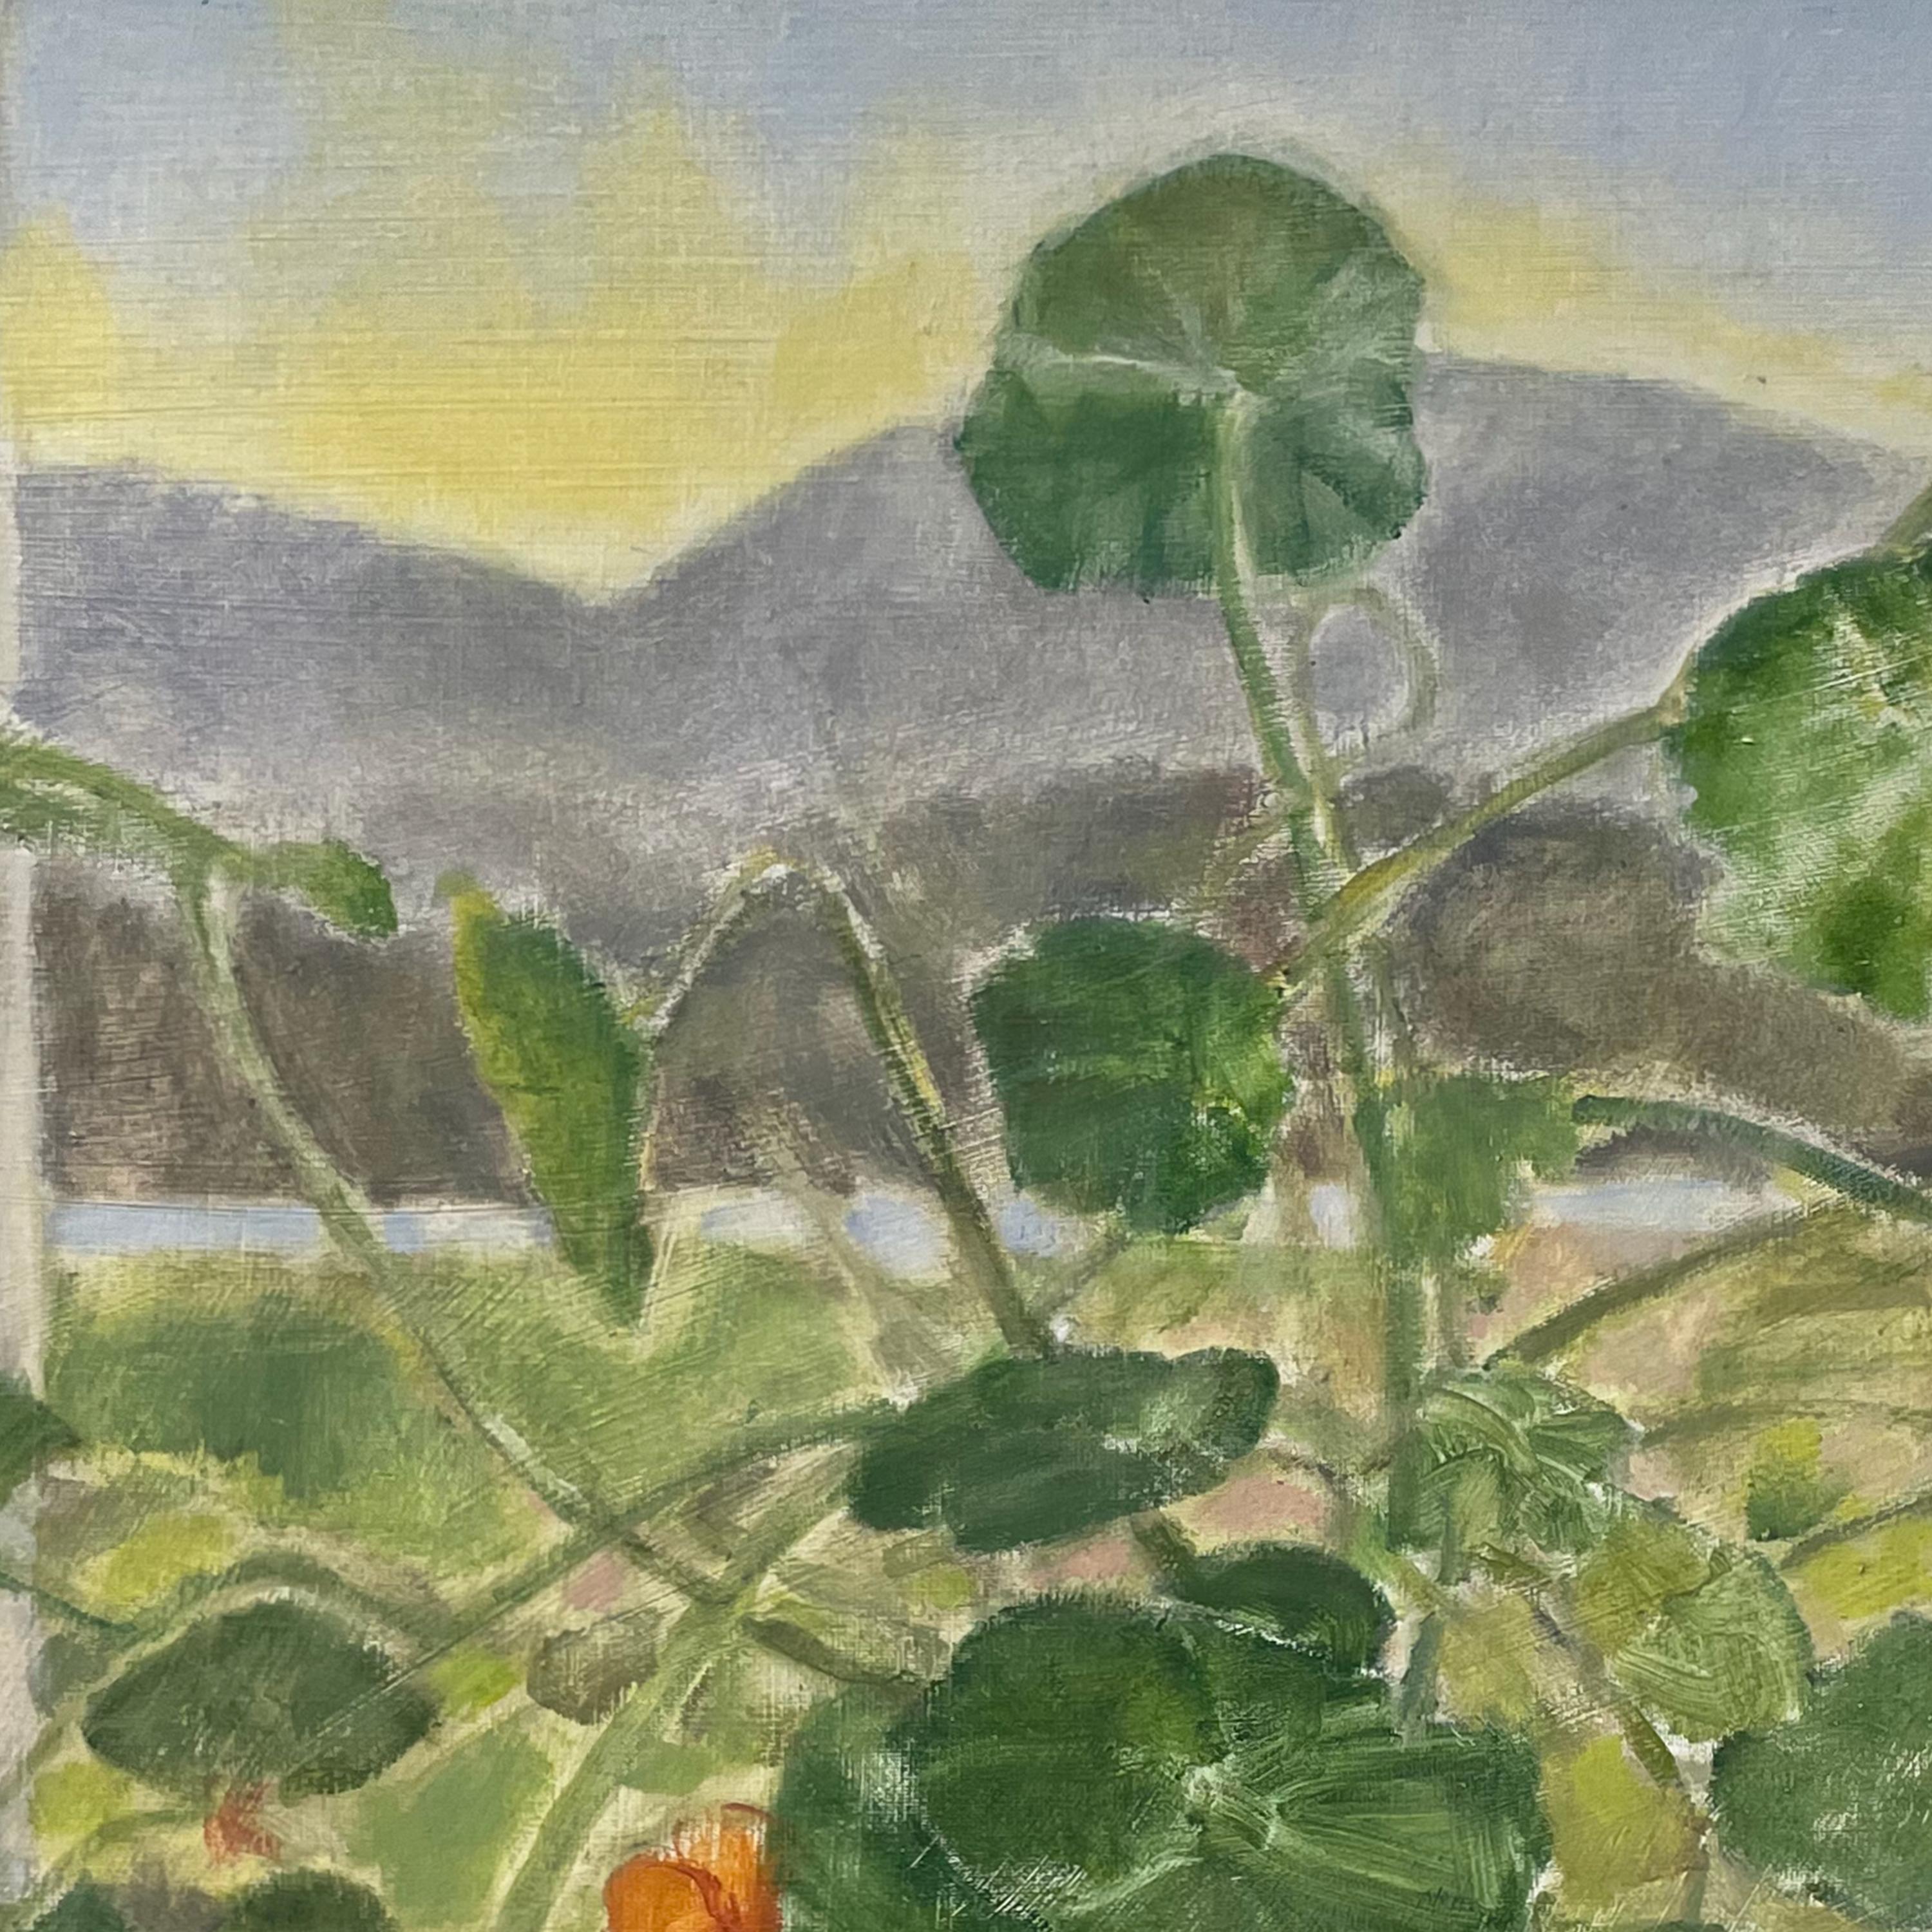 Out the Window (Nasturtiums), 2022, oil on canvas, floral still life painting - Painting by Daisy Craddock